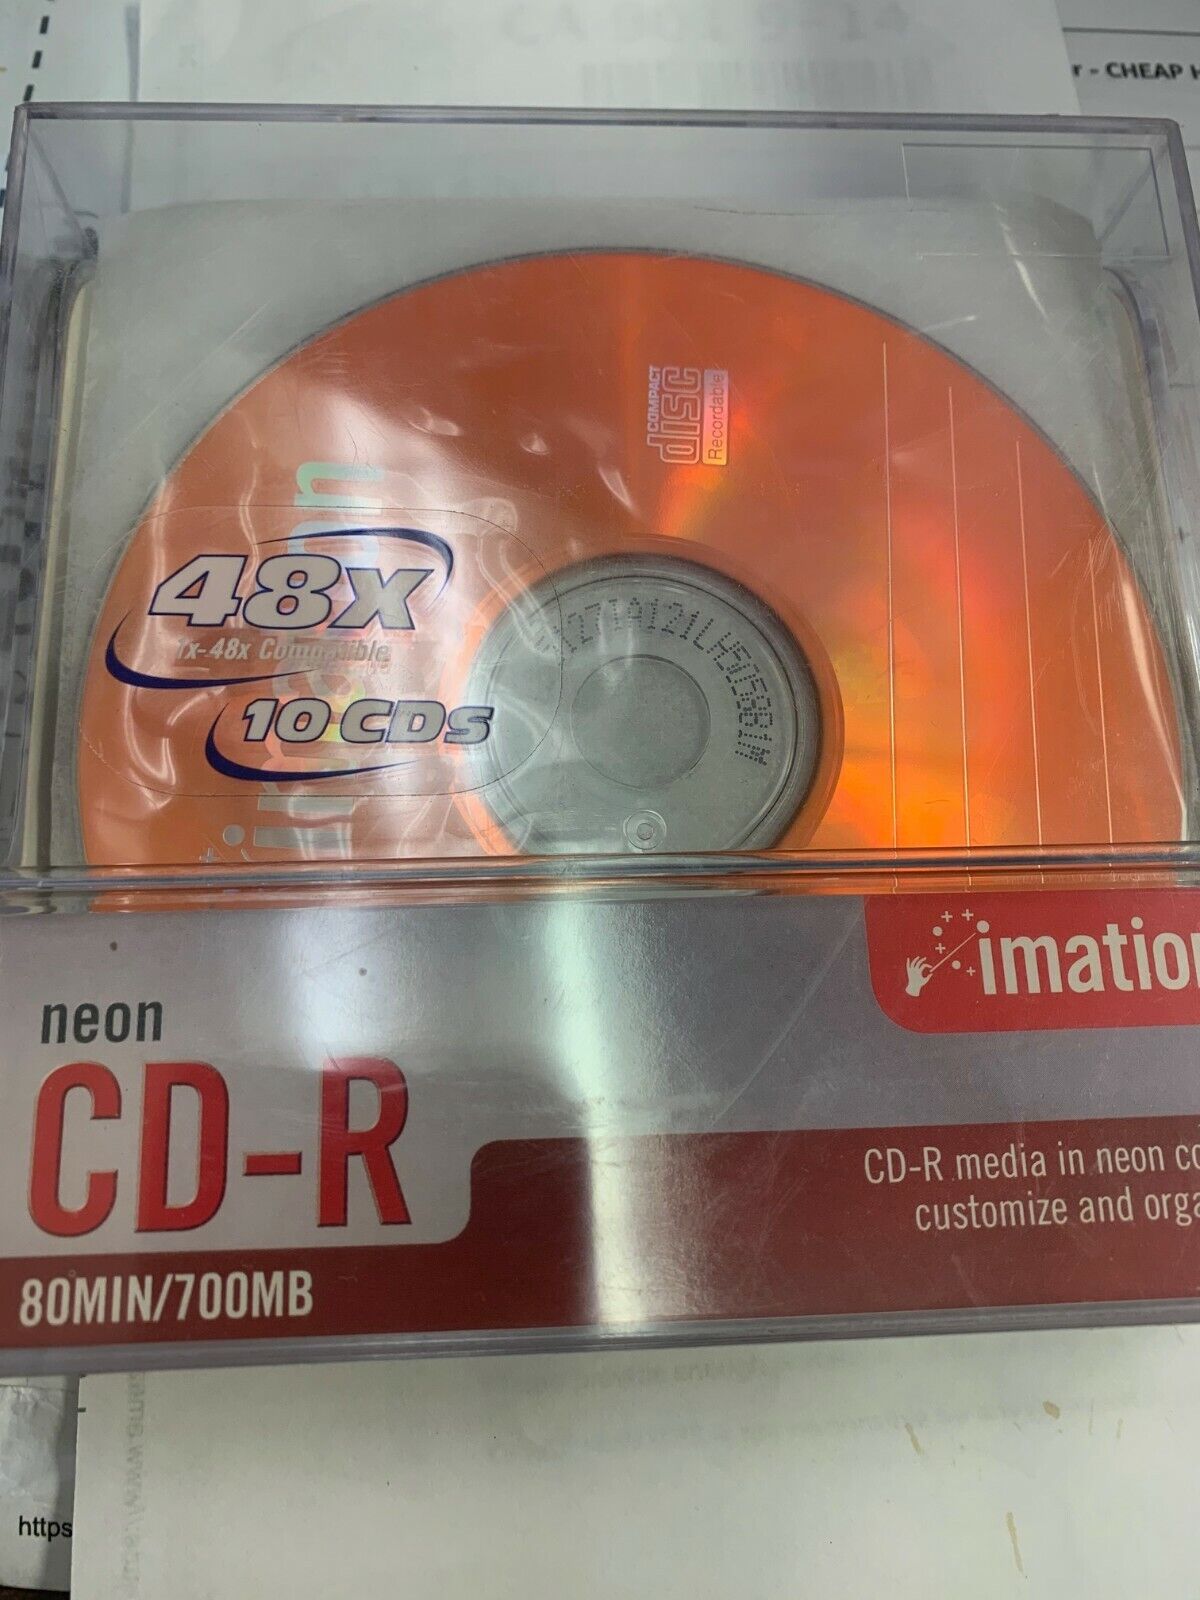 Imation Neon CD-R 10 Pack: 48X, 700MB, 80min 